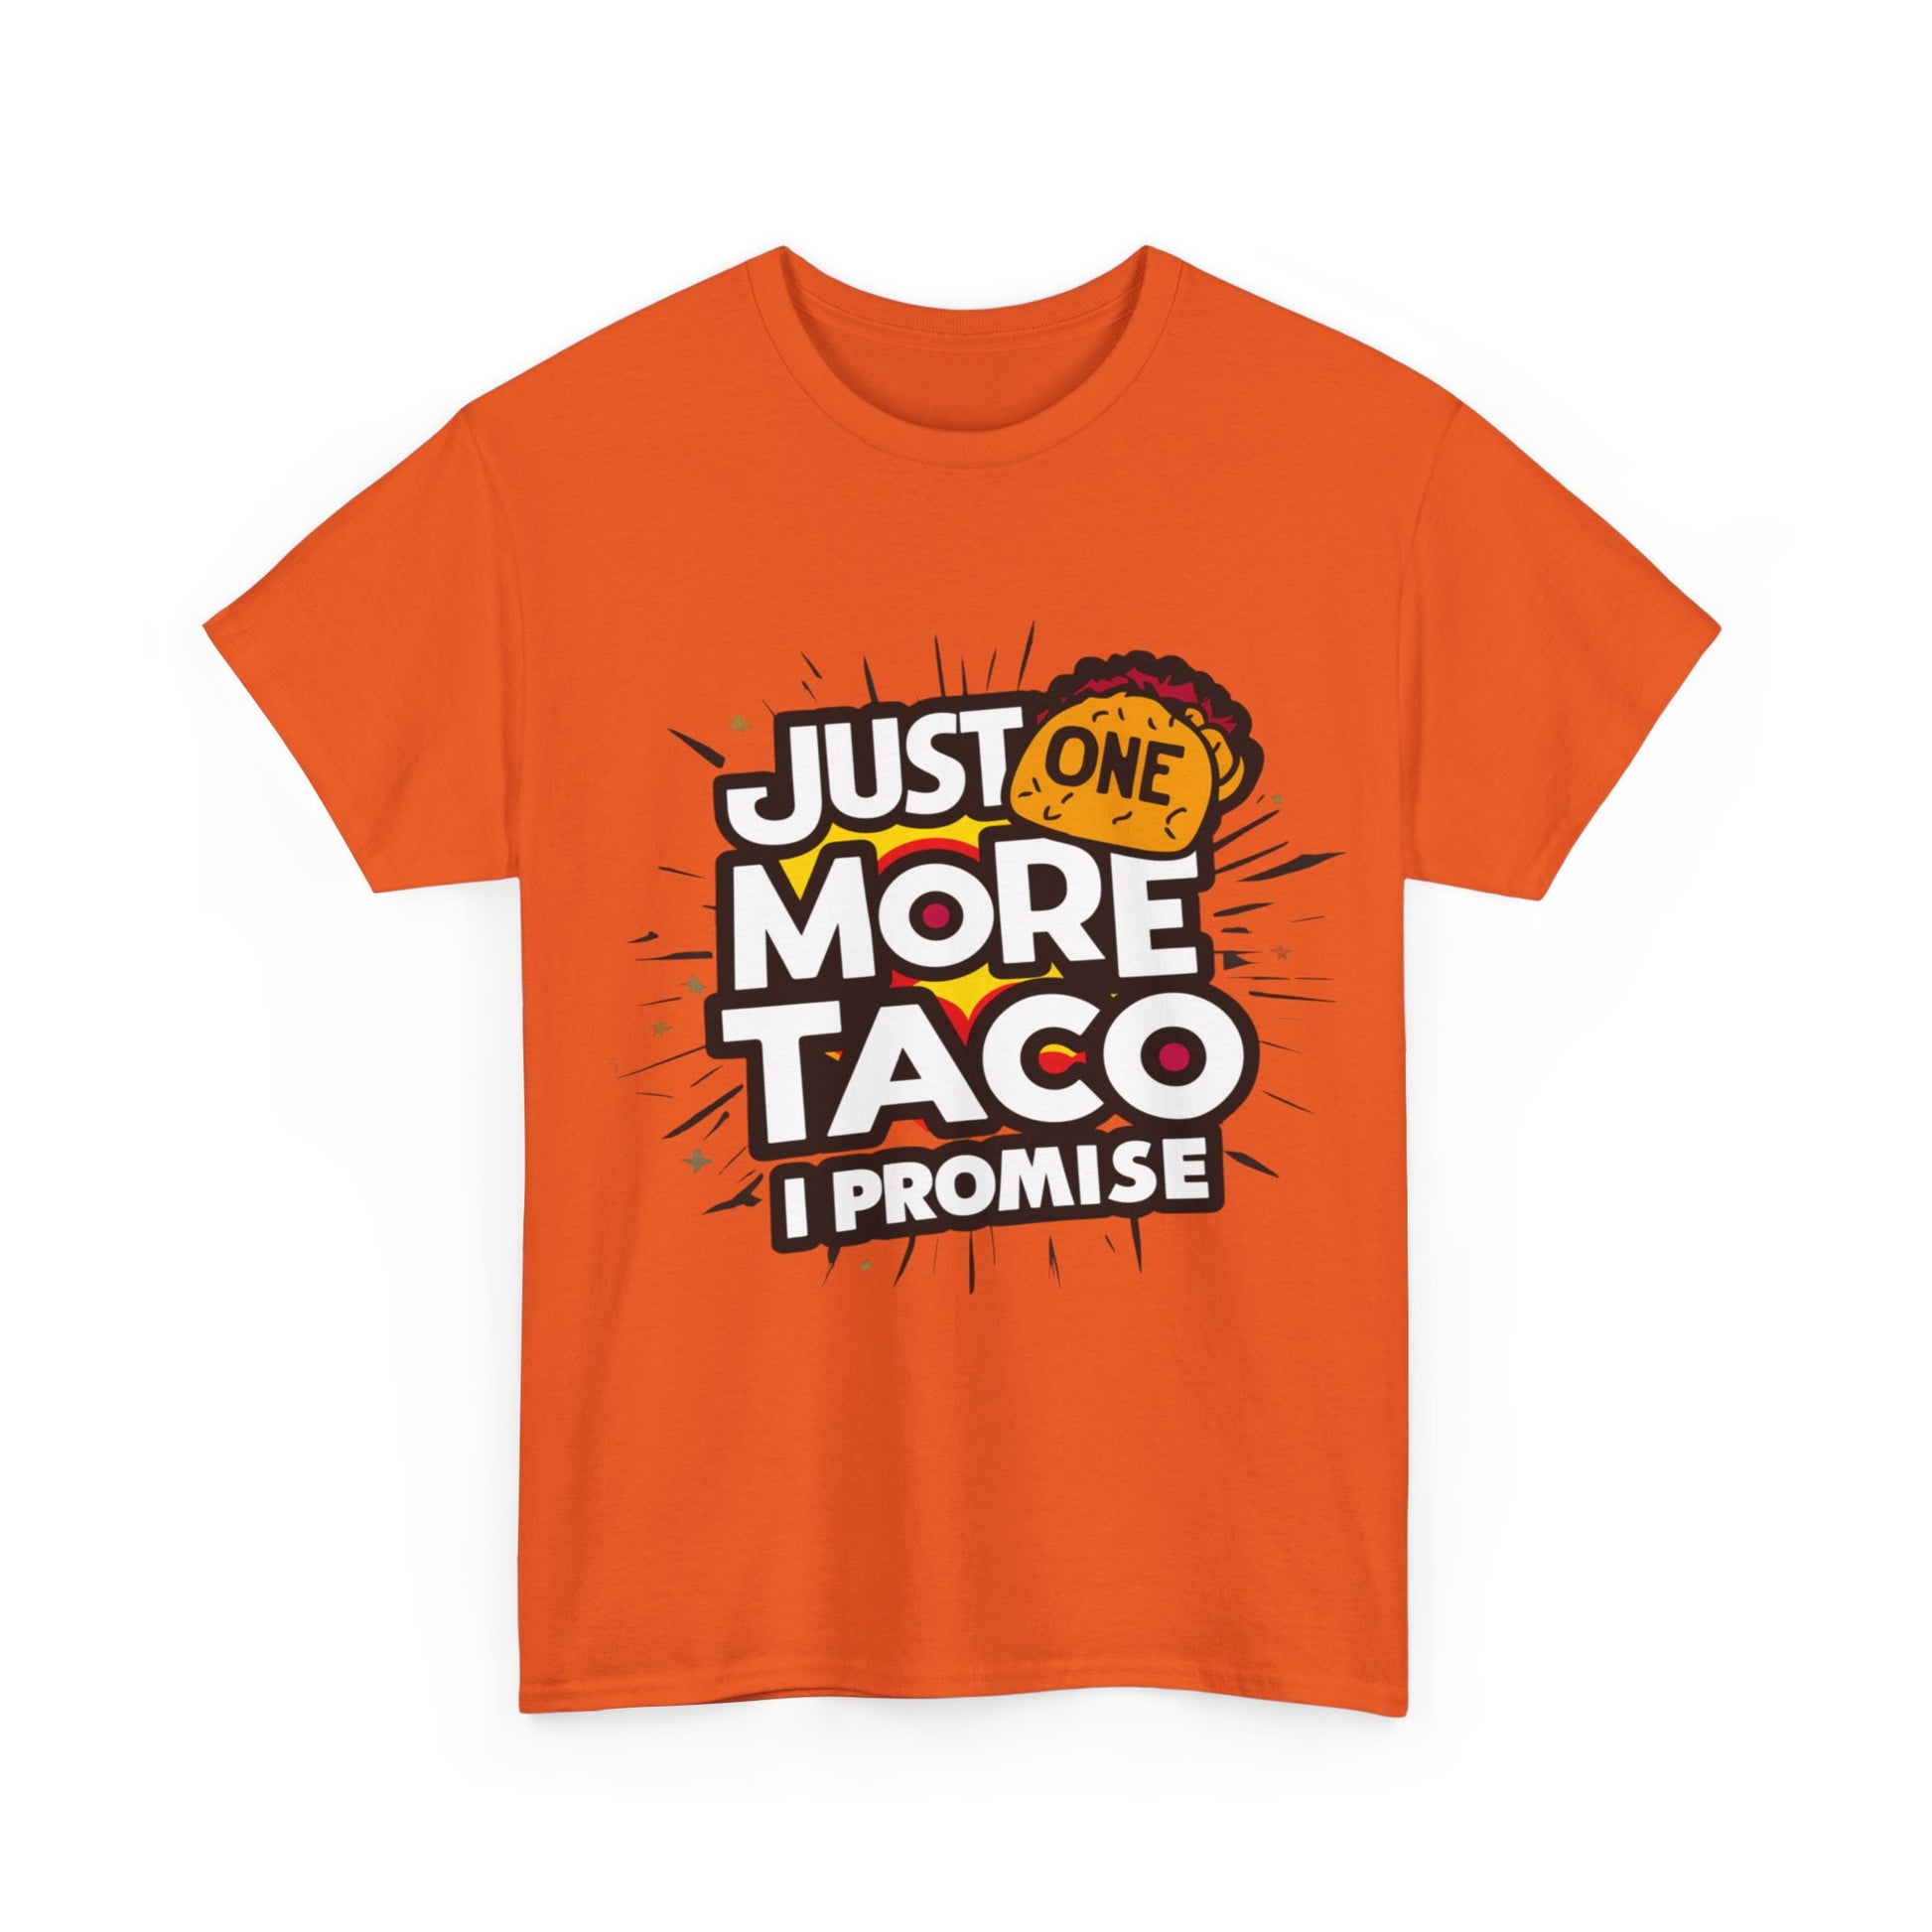 Copy of Just One More Taco I Promise Mexican Food Graphic Unisex Heavy Cotton Tee Cotton Funny Humorous Graphic Soft Premium Unisex Men Women Orange T-shirt Birthday Gift-30